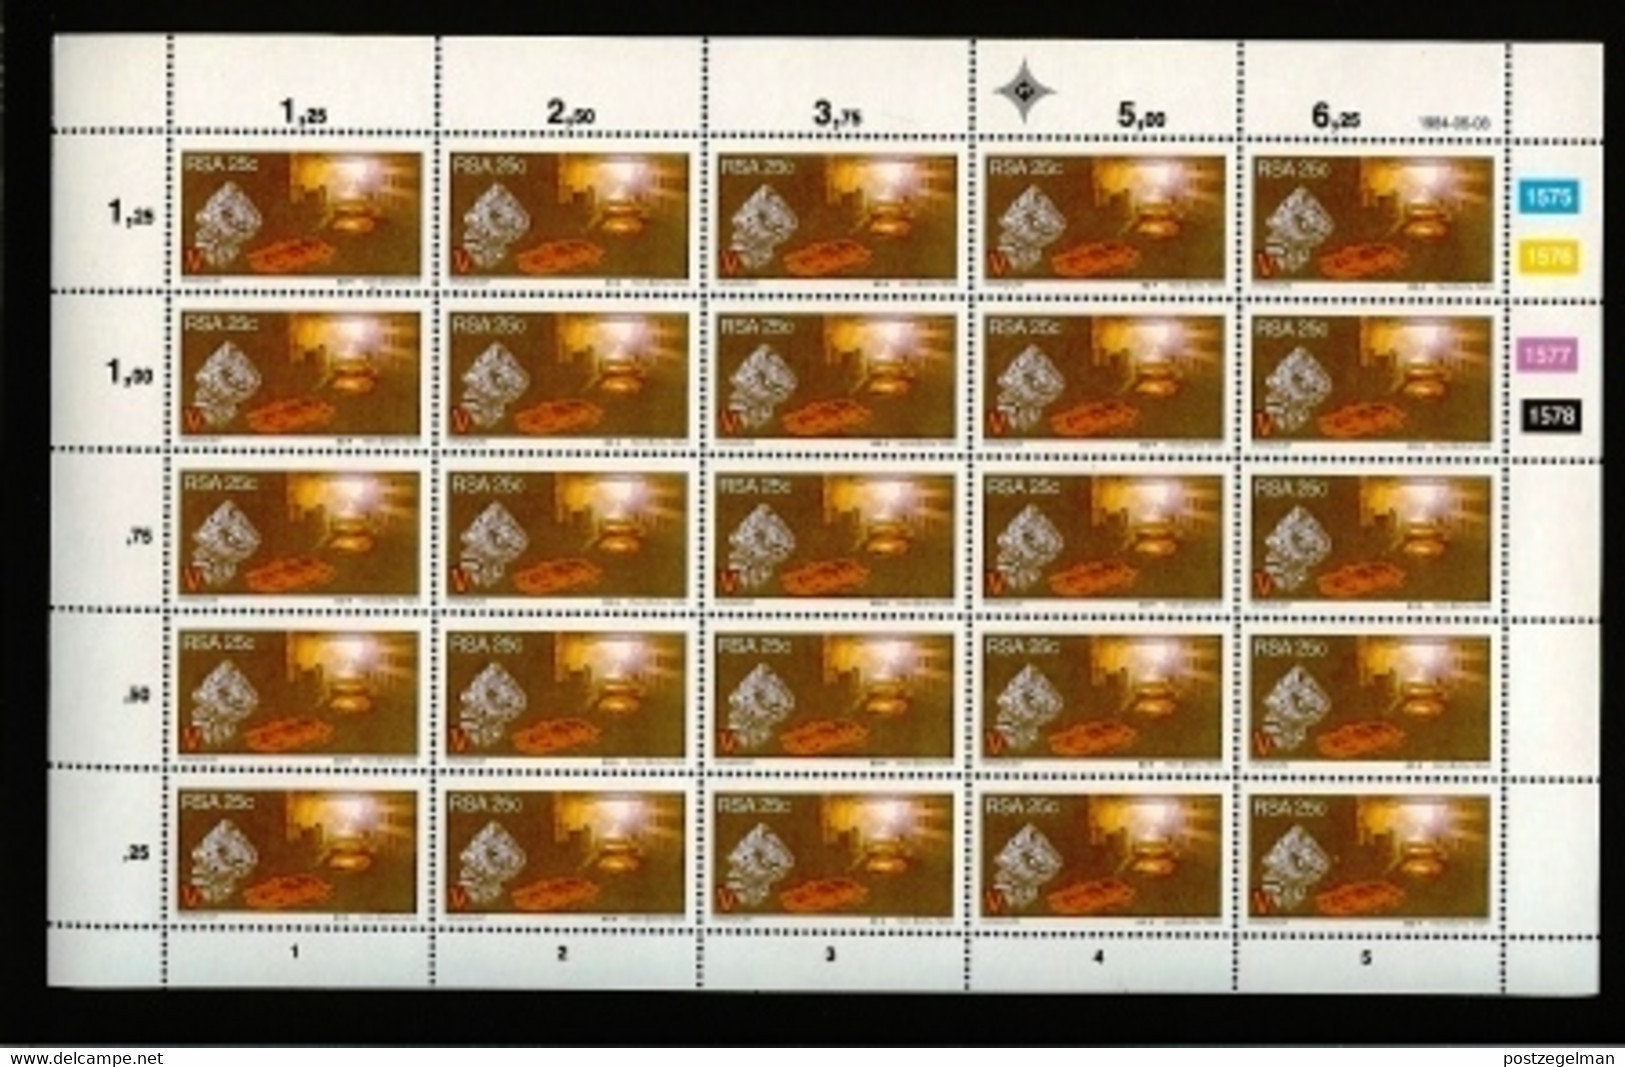 RSA, 1984, MNH, 25 Stamp(s) On Full Sheet(s), Minerals, Michell Nr(s).  647-650, Scannr. F2507 - Neufs